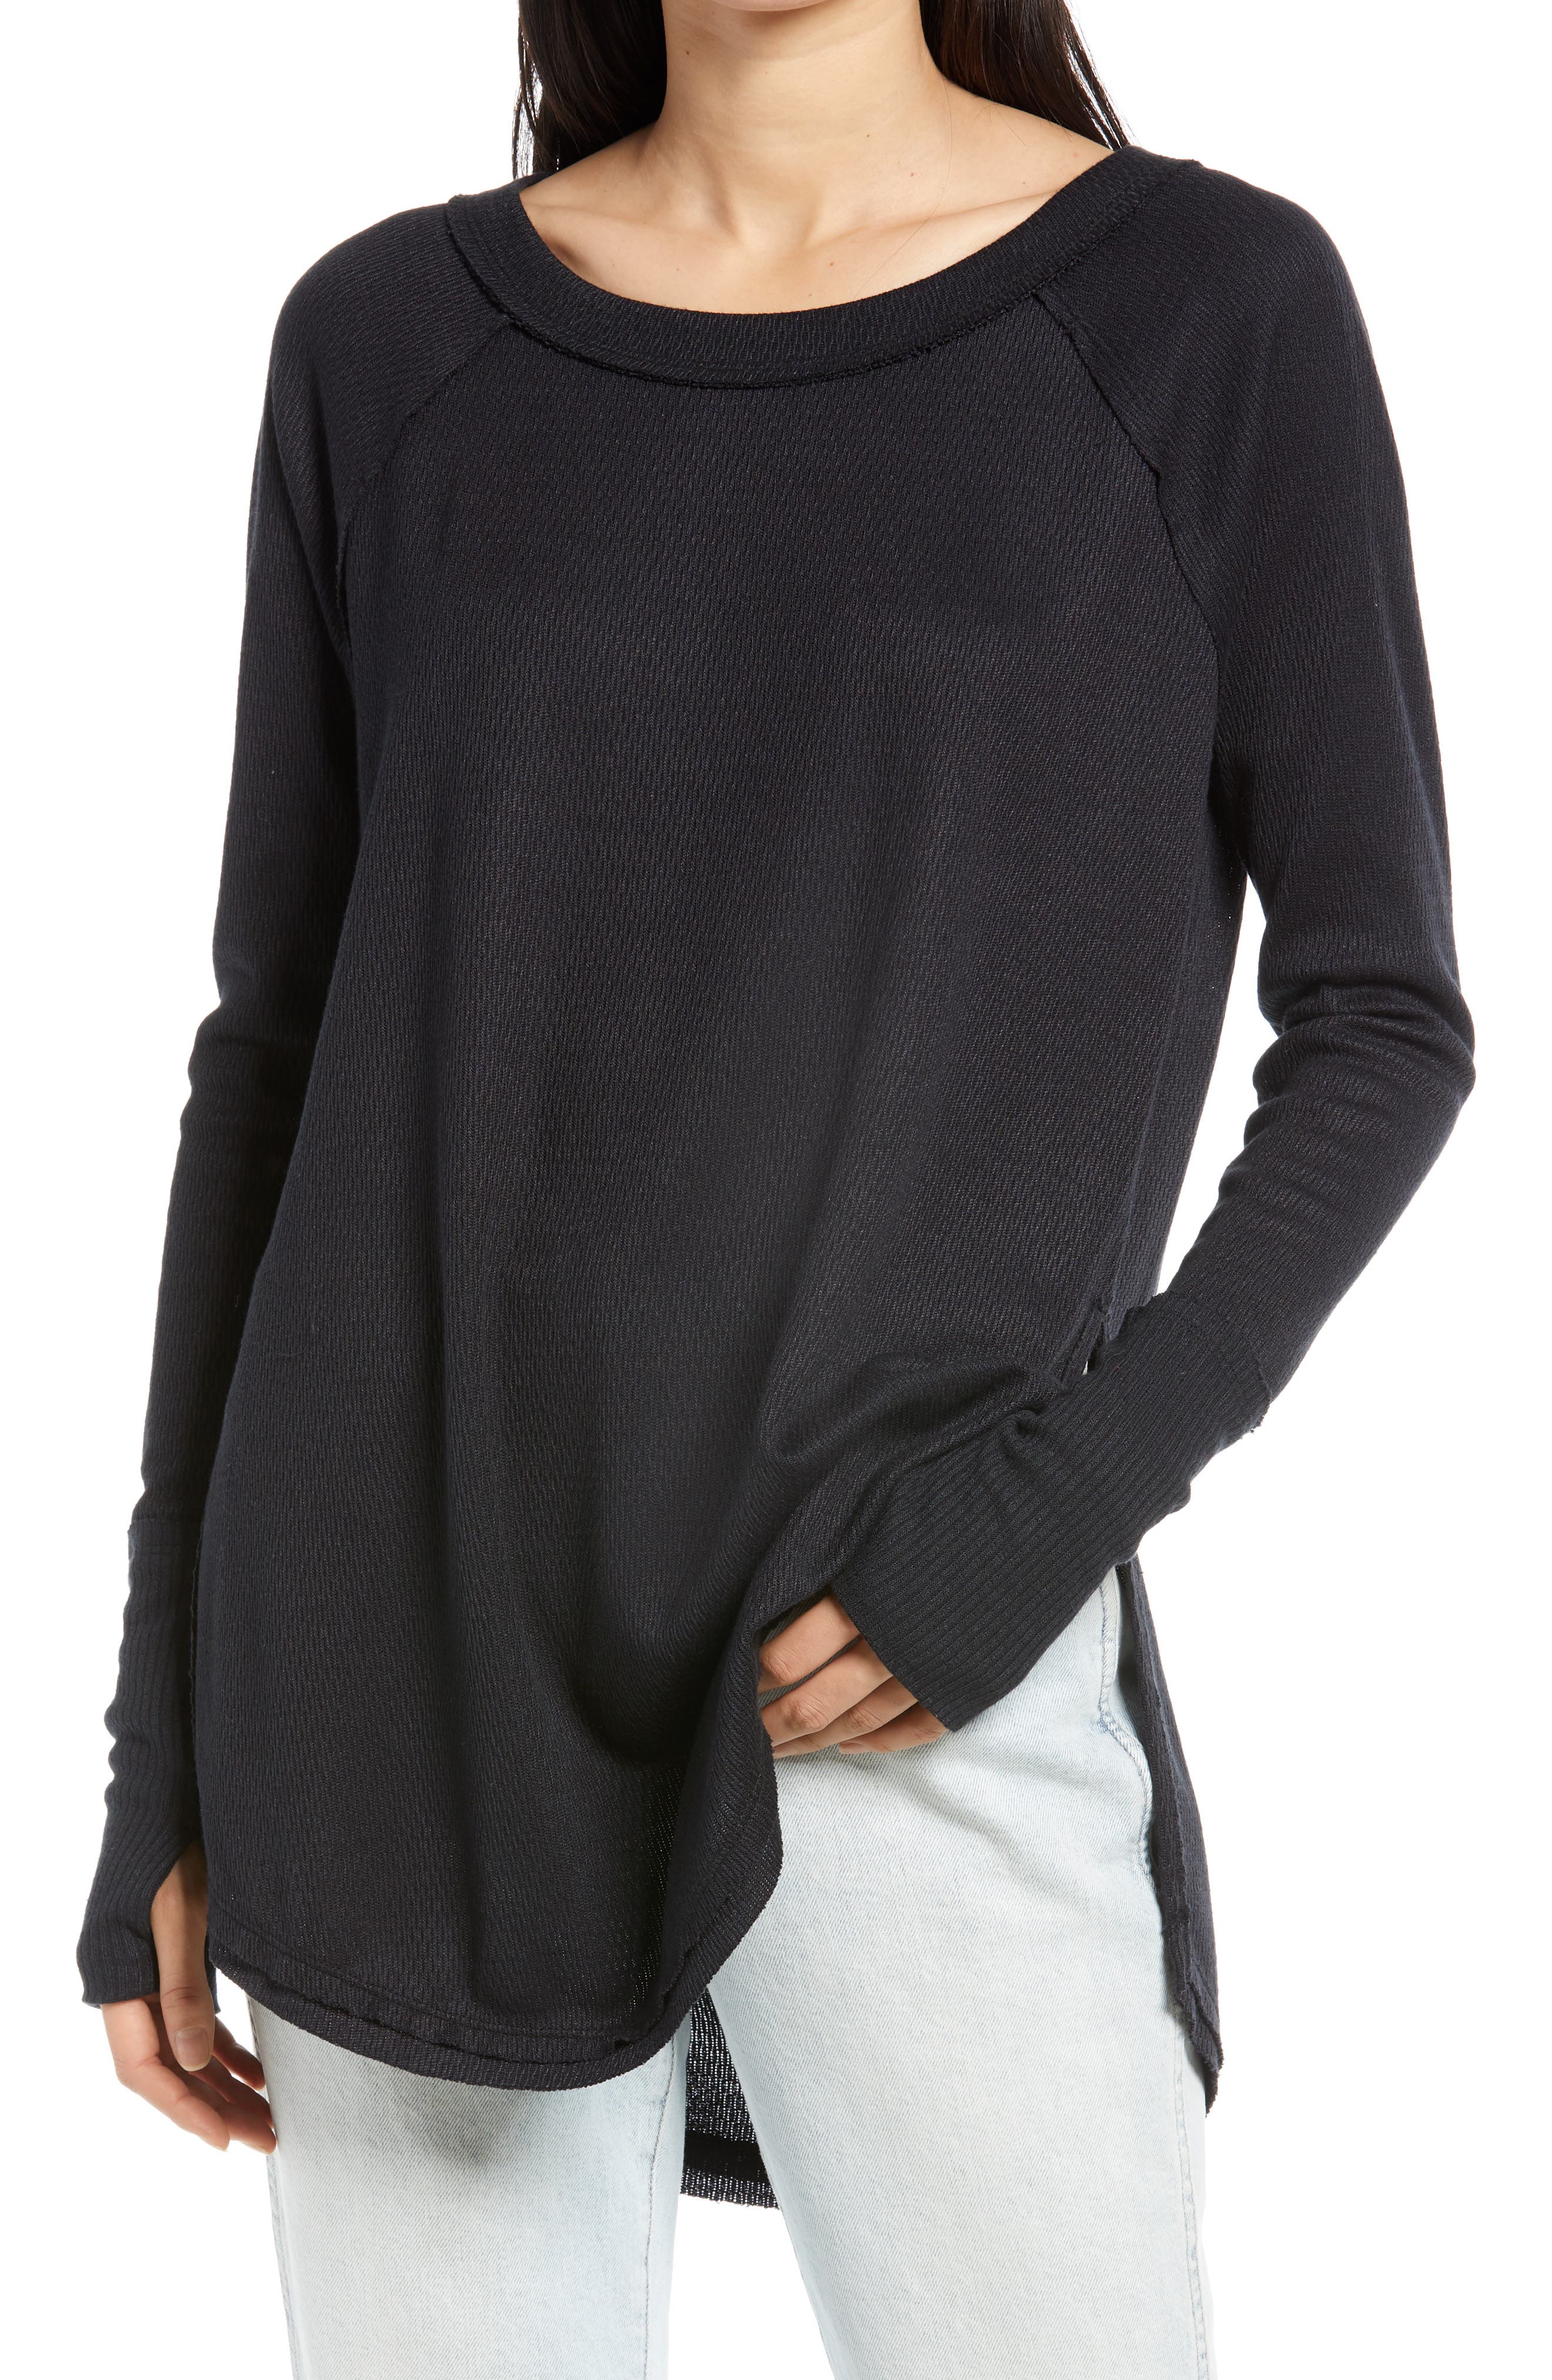 Free People Snowy Thermal Shirt | Nordstrom